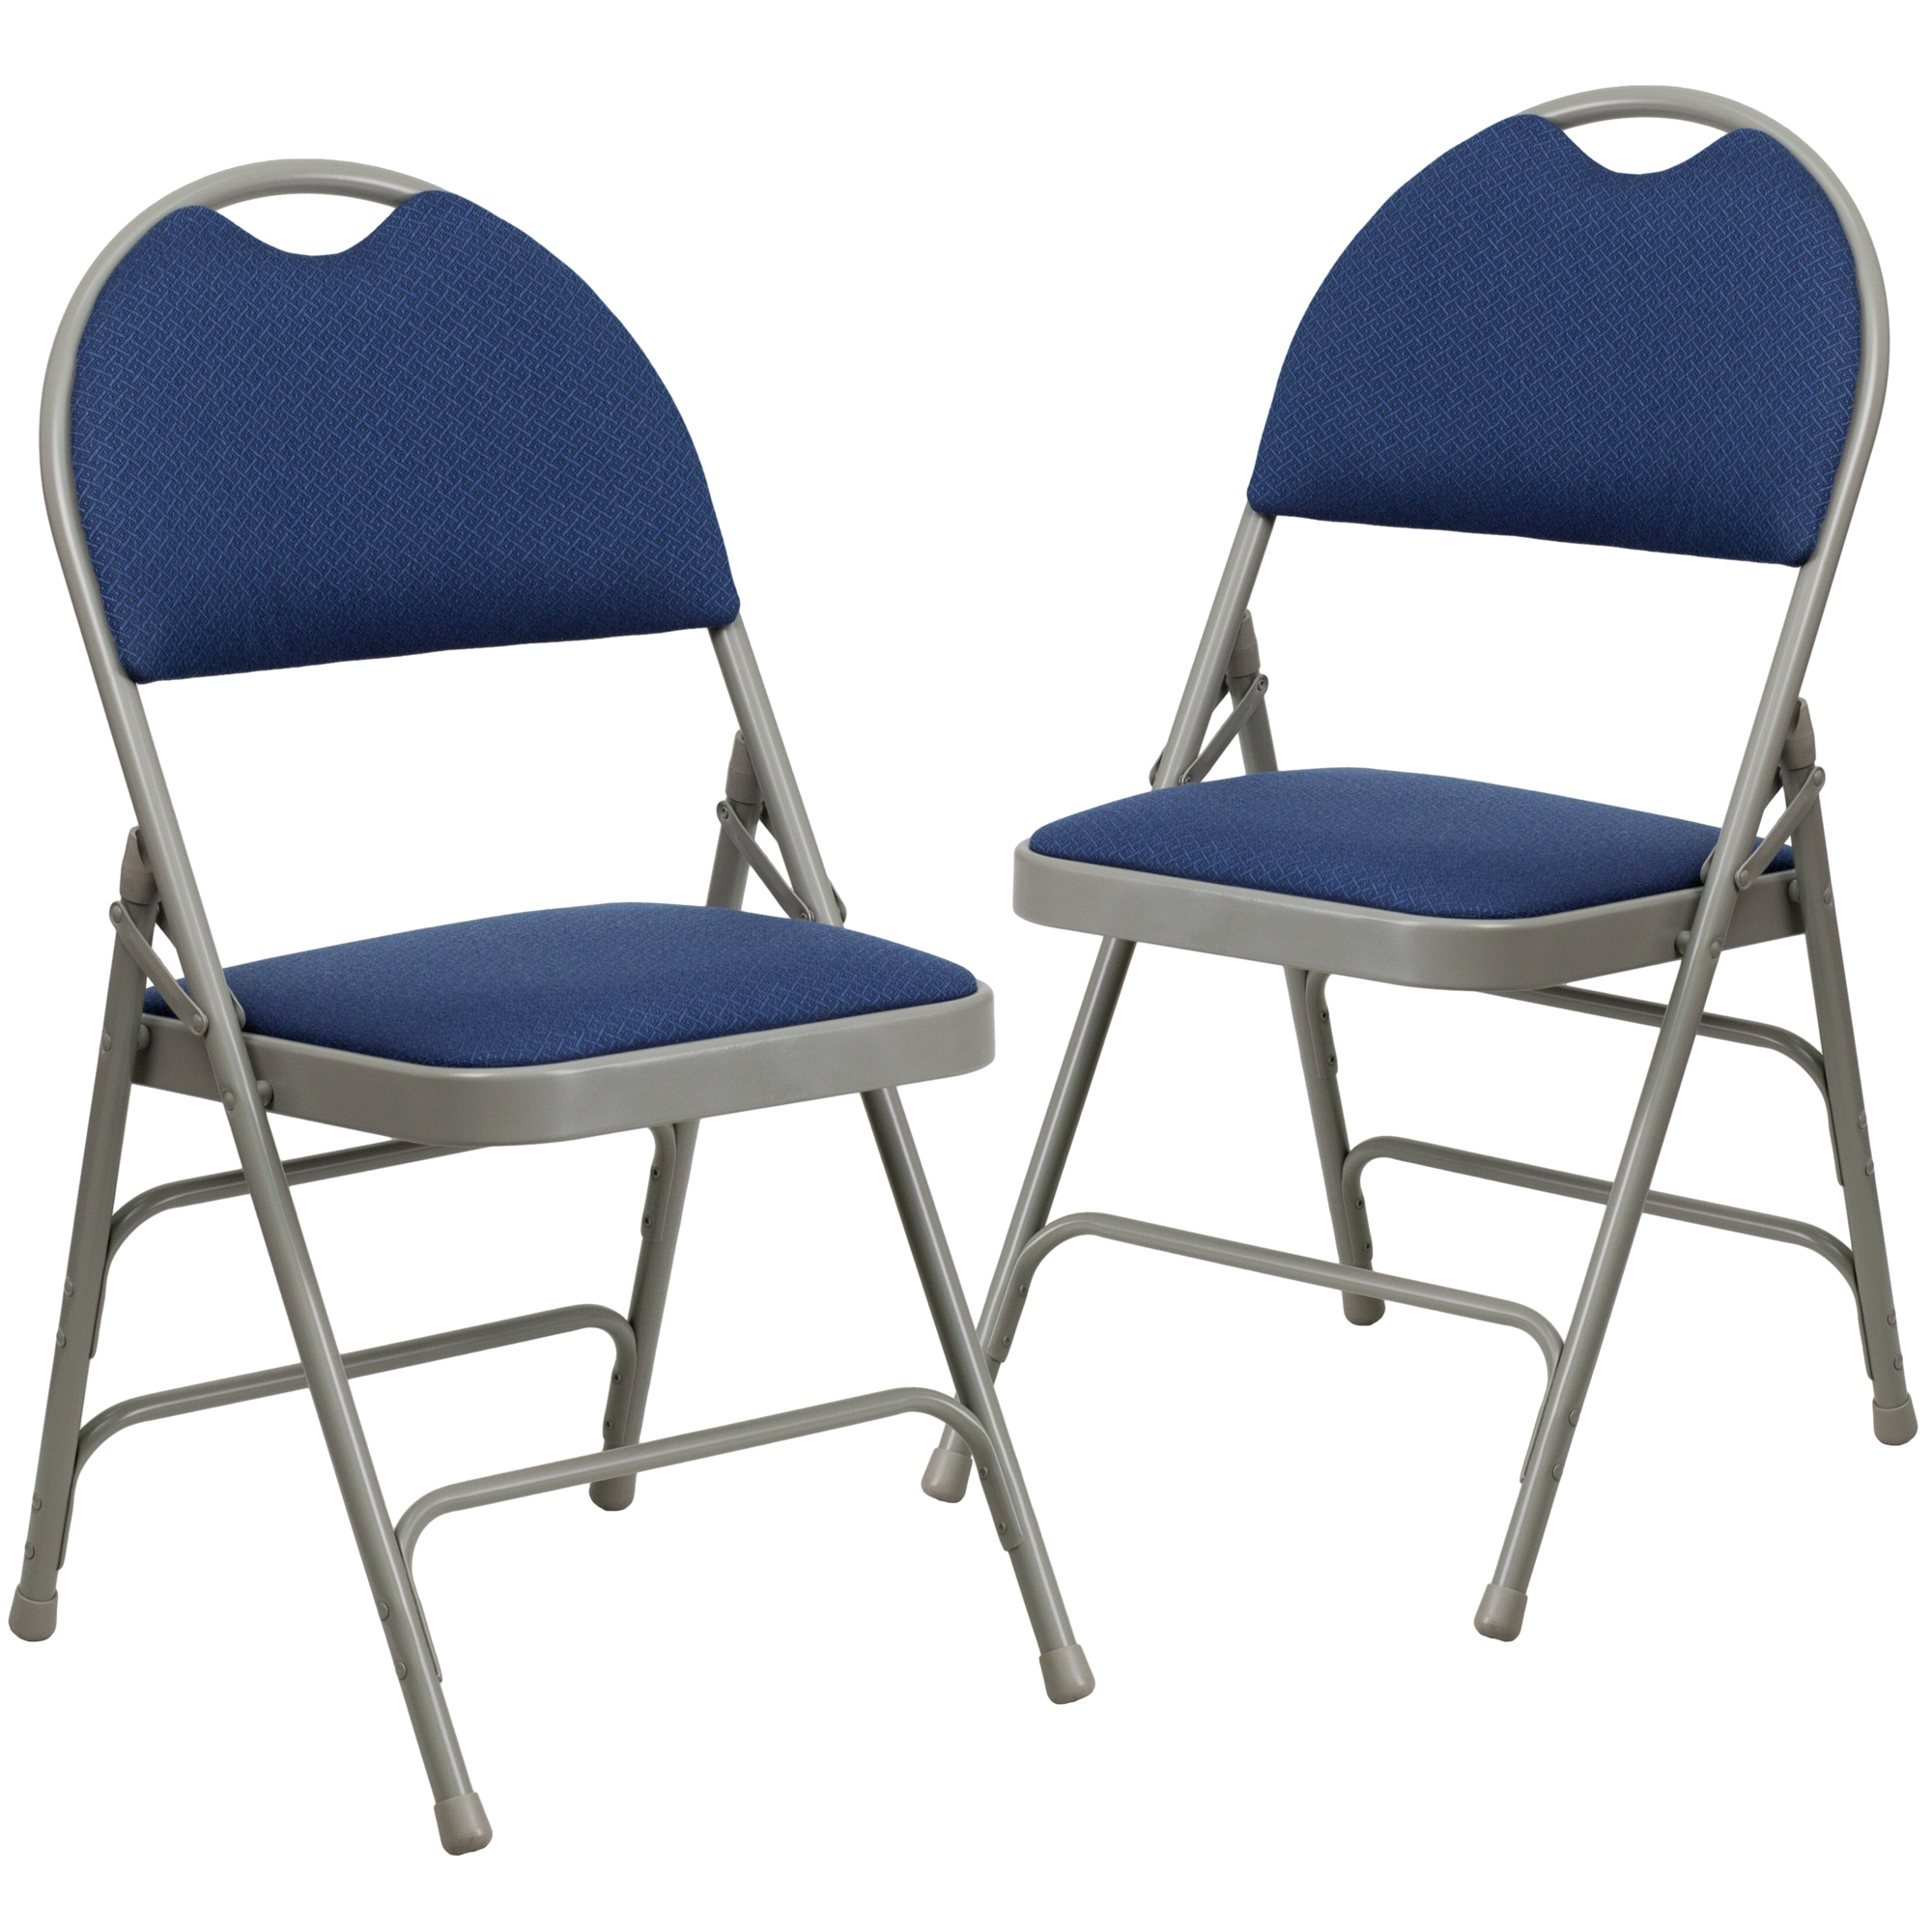 Flash Furniture, 2PK Triple Braced Navy Fabric Metal Folding Chair, Primary Color Blue, Included (qty.) 2, Model 2HAMC705AF3NVY